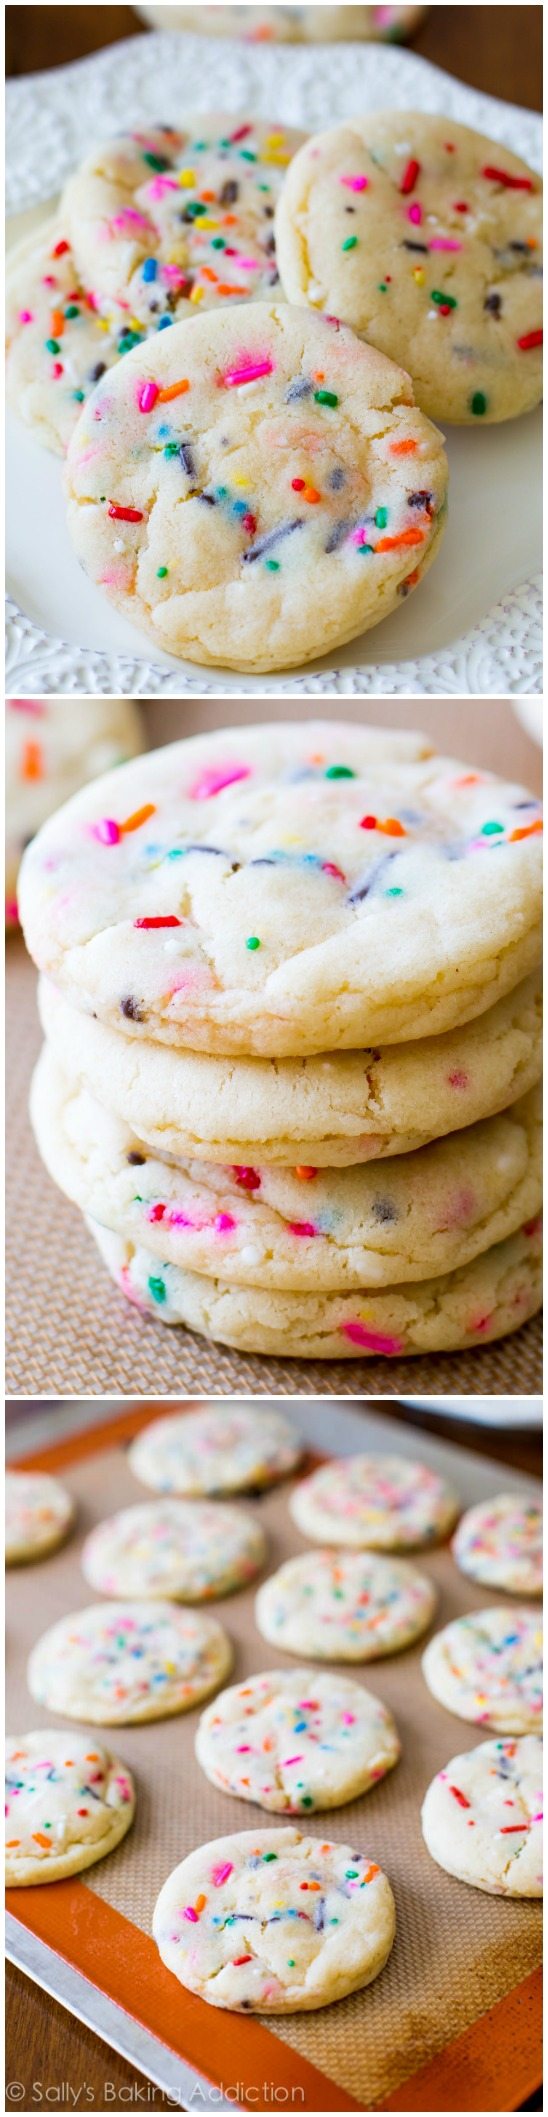 3 images of funfetti sugar cookies